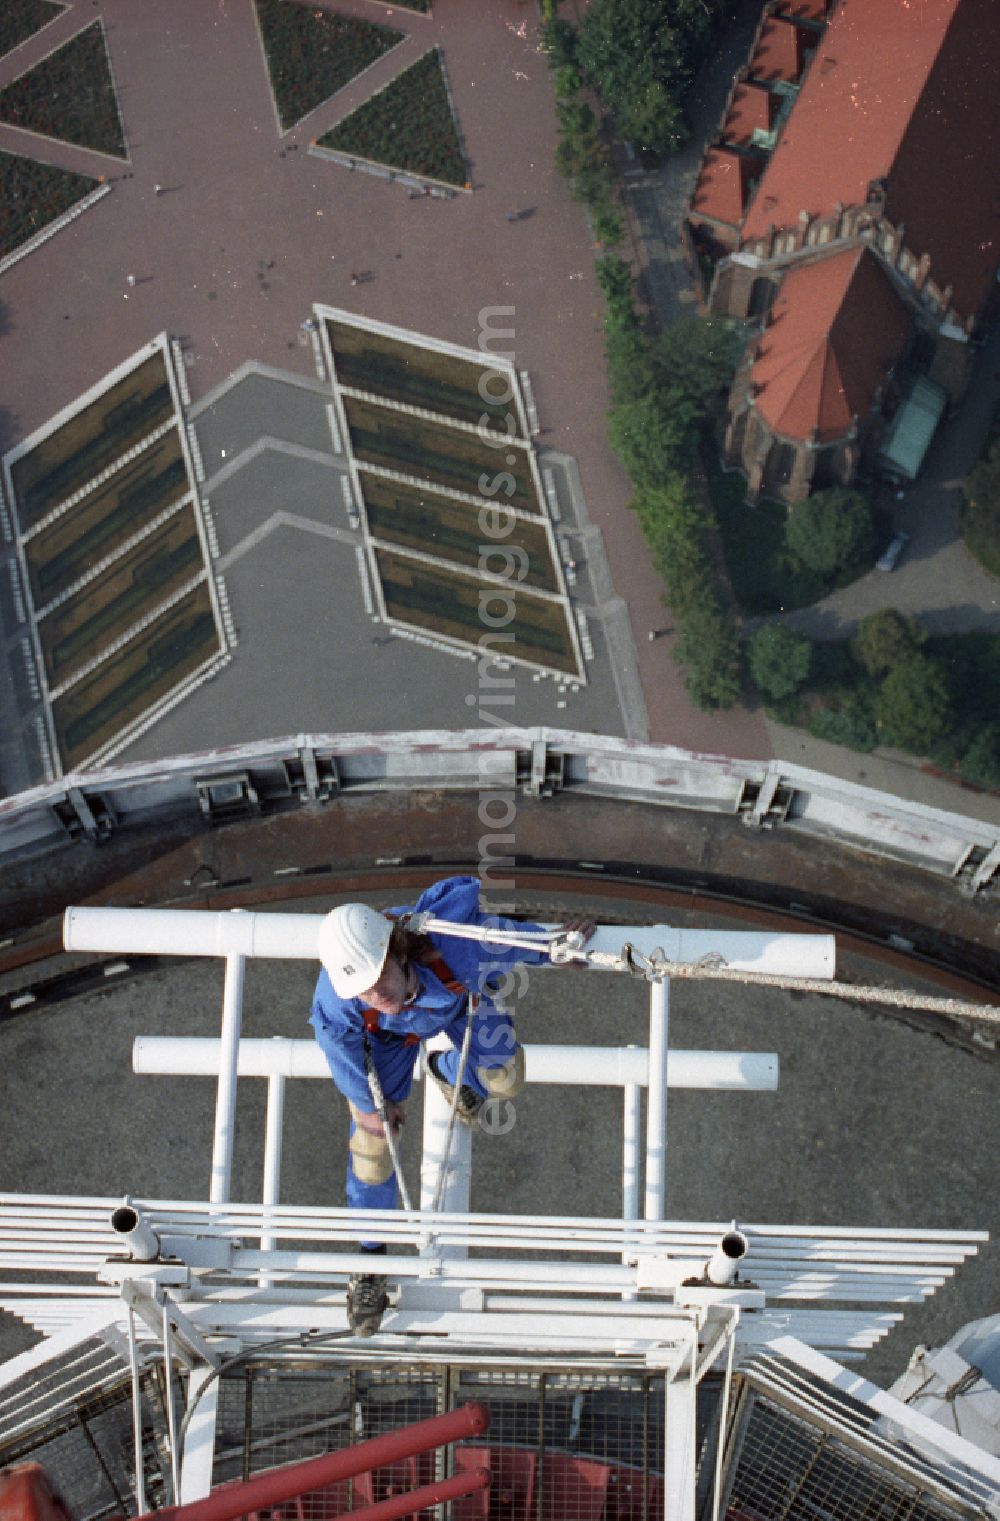 Berlin: Technicians during maintenance and repair work during external work on the antenna support of the Berlin TV tower in the Mitte district of Berlin East Berlin